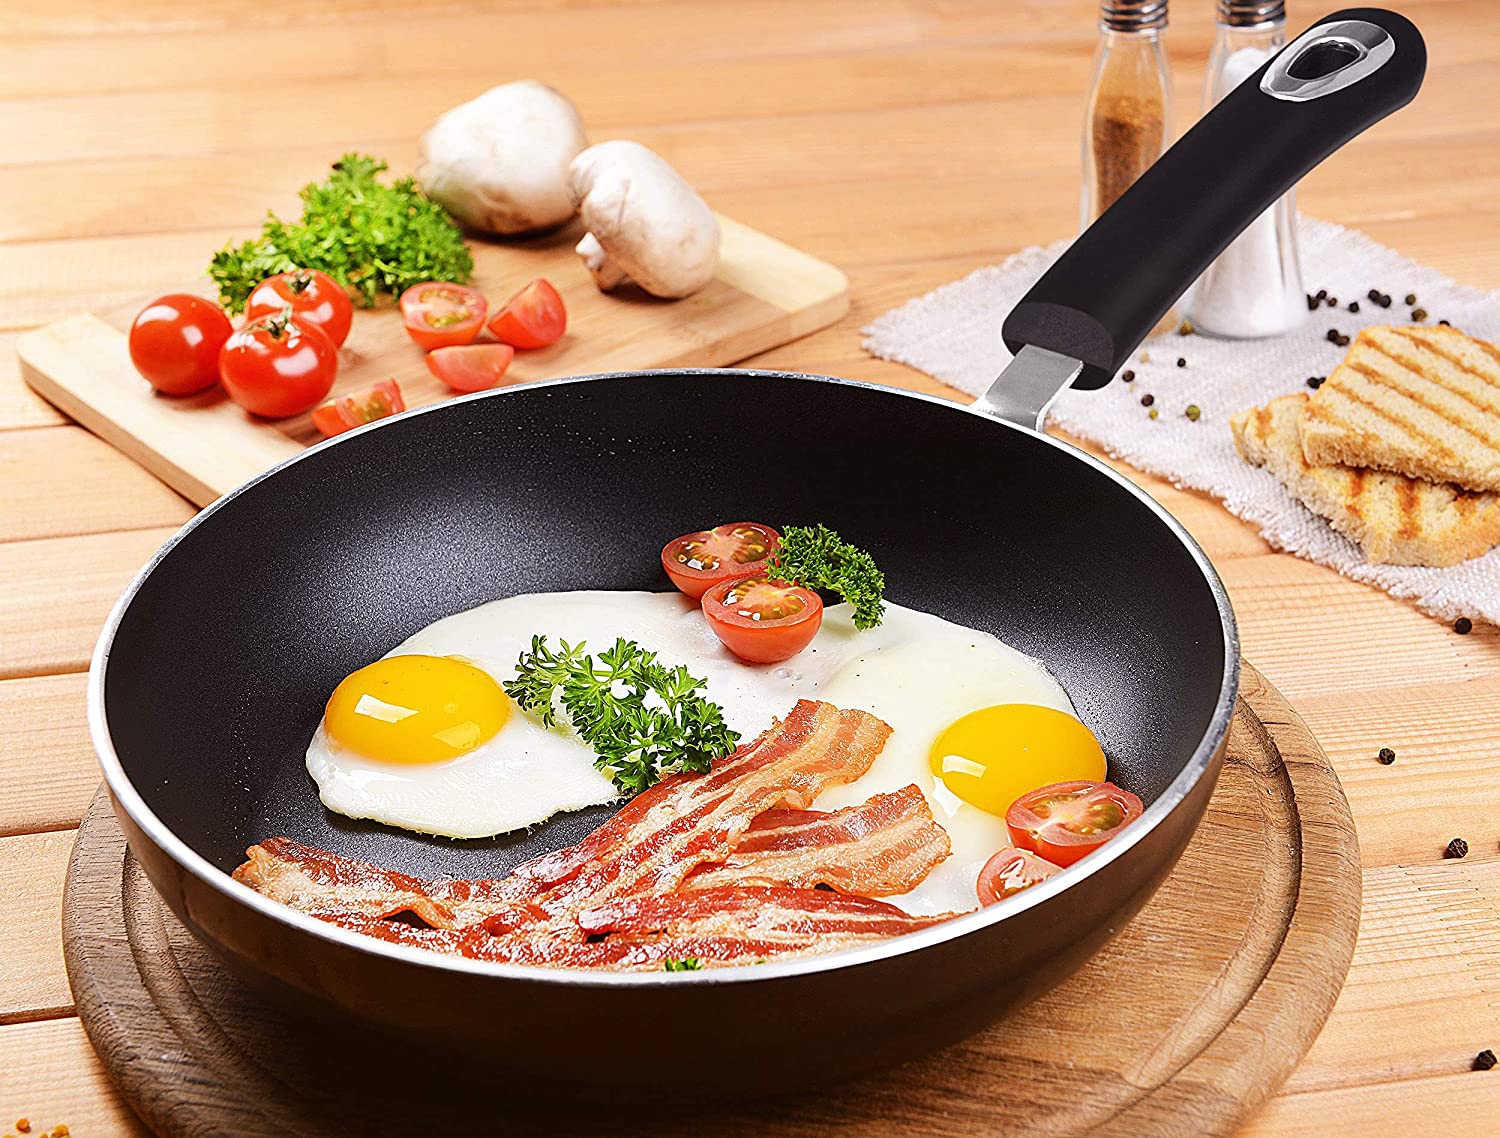 Utopia Kitchen 11 Inch Nonstick Frying Pan - Induction Bottom - Aluminum  Alloy and Scratch Resistant Body - Riveted Handle - Dishwasher Friendly